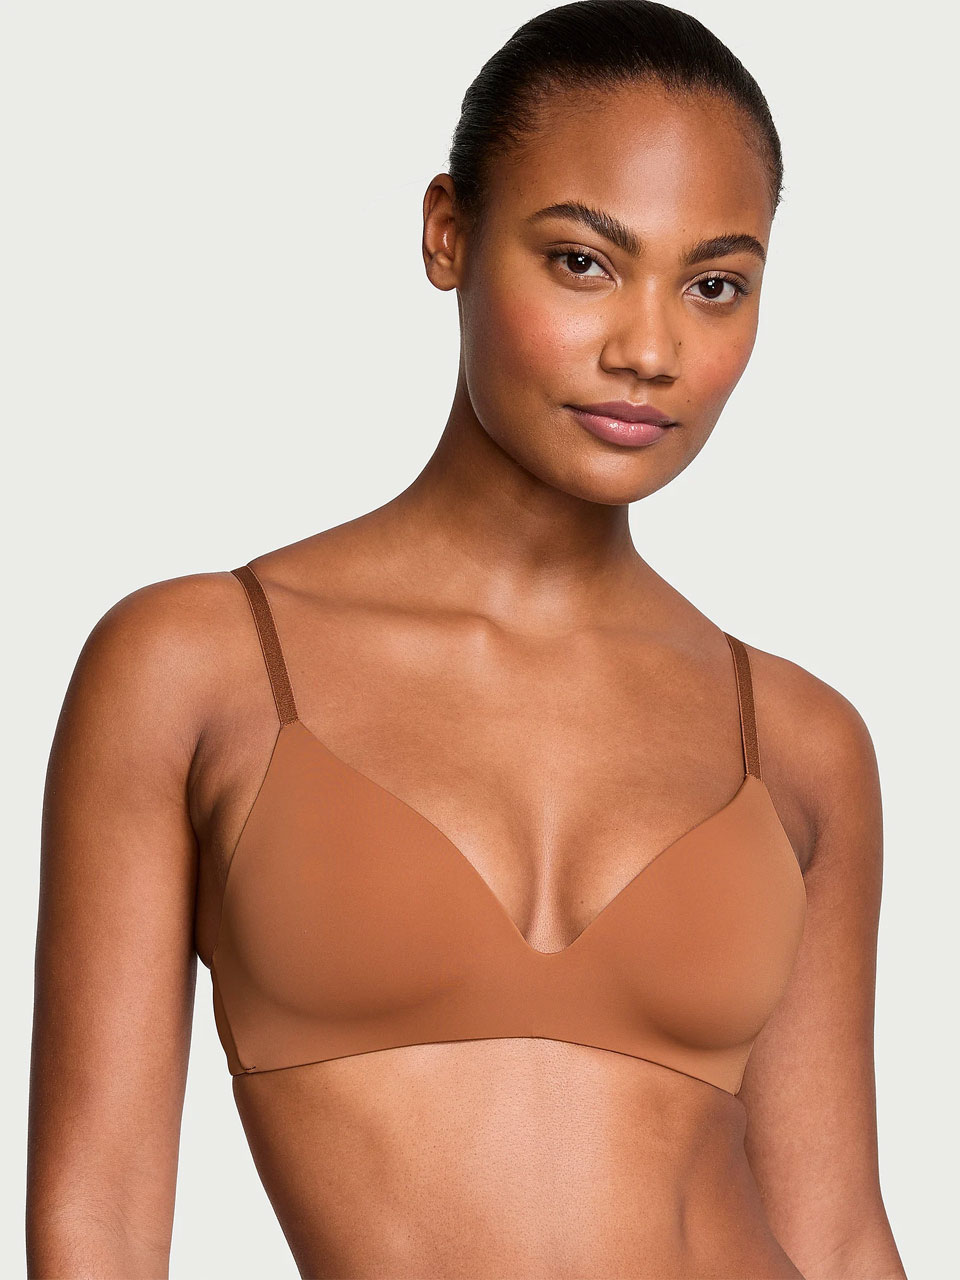 The Ultimate Bra Size Guide: Find Your Perfect Fit